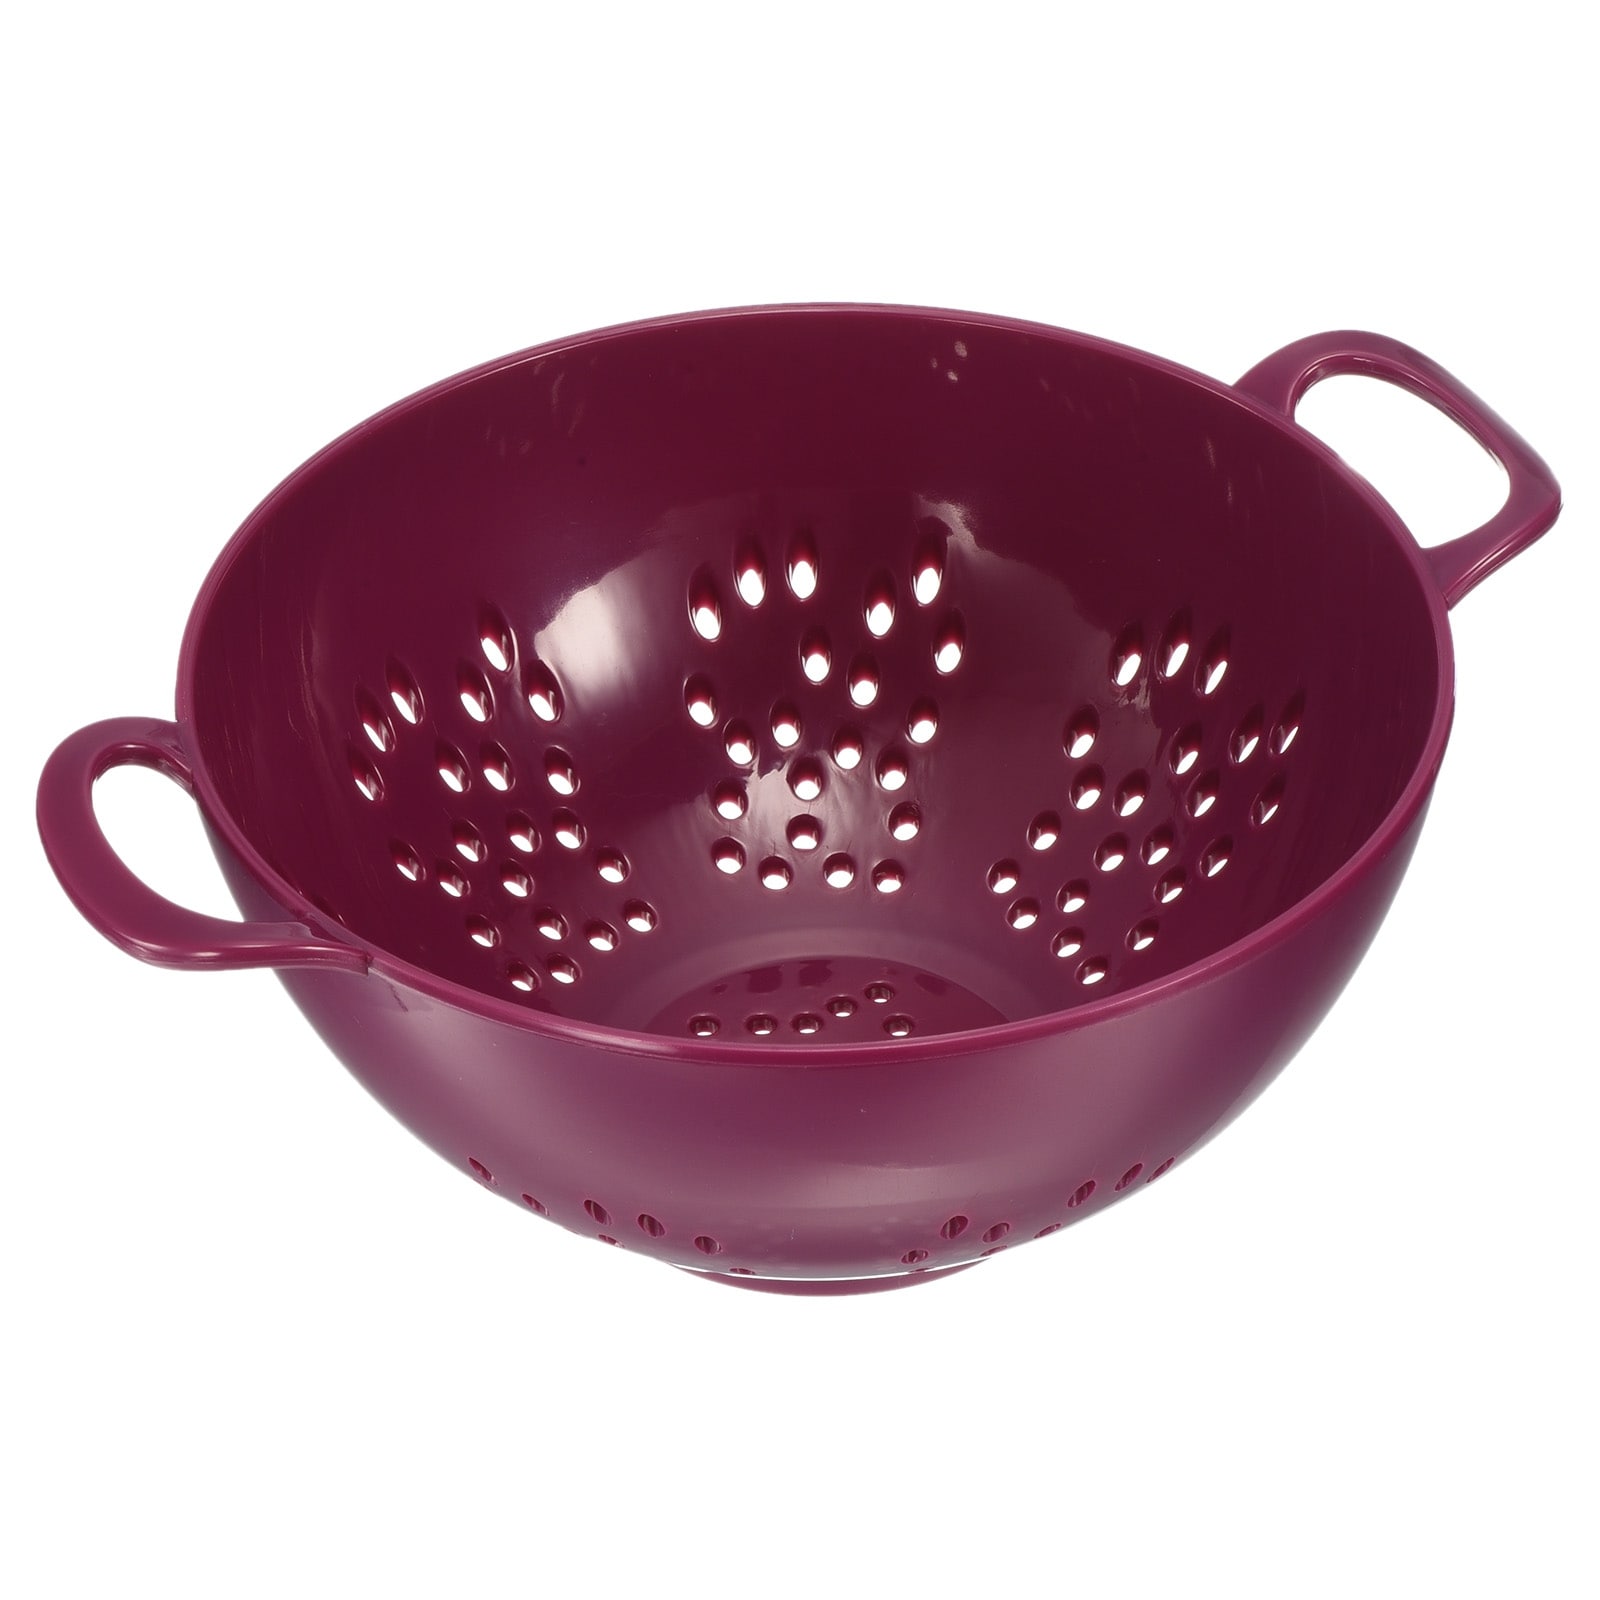 https://ak1.ostkcdn.com/images/products/is/images/direct/2fadd340afb7bcaaaf3476ff8f2c59b9b6763686/Rice-Sieve-Washing-Colander-Strainer-Drainer-Fruit-Cleaning-Bowl-Purple.jpg